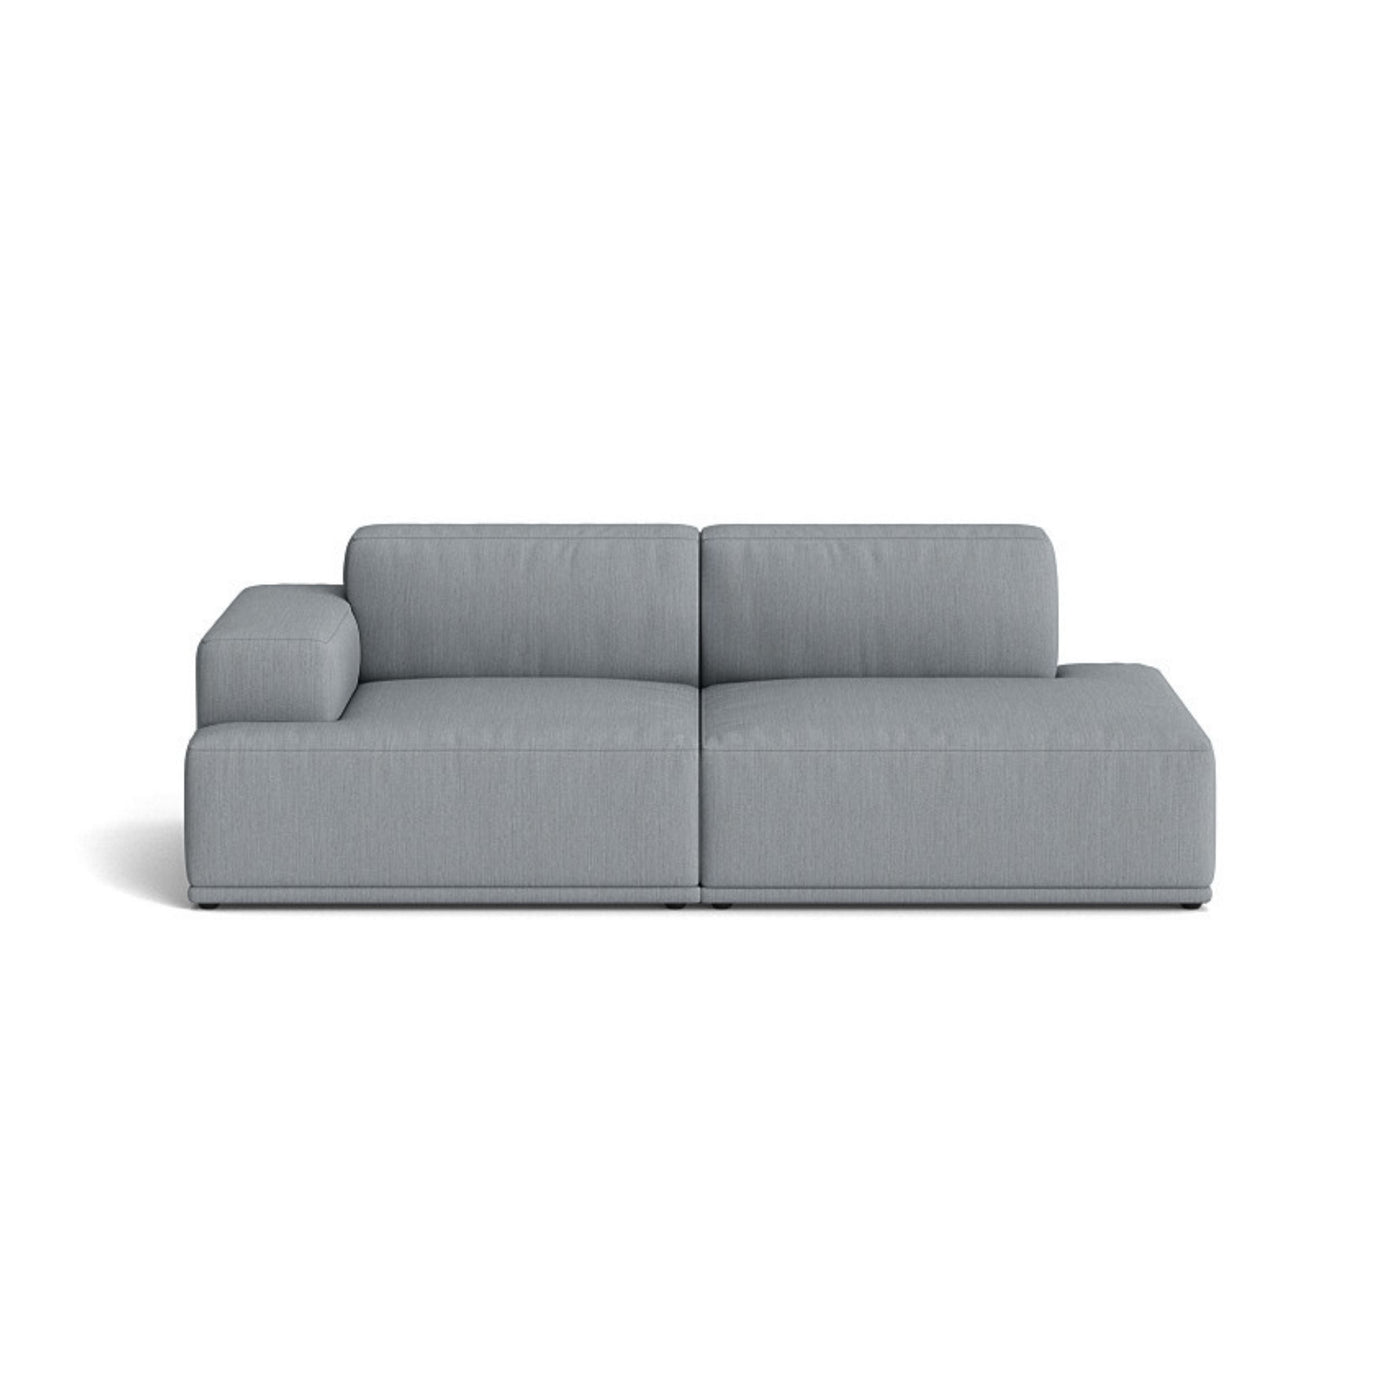 Muuto Connect Soft Modular 2 Seater Sofa, configuration 2. made-to-order from someday designs. #colour_balder-1775